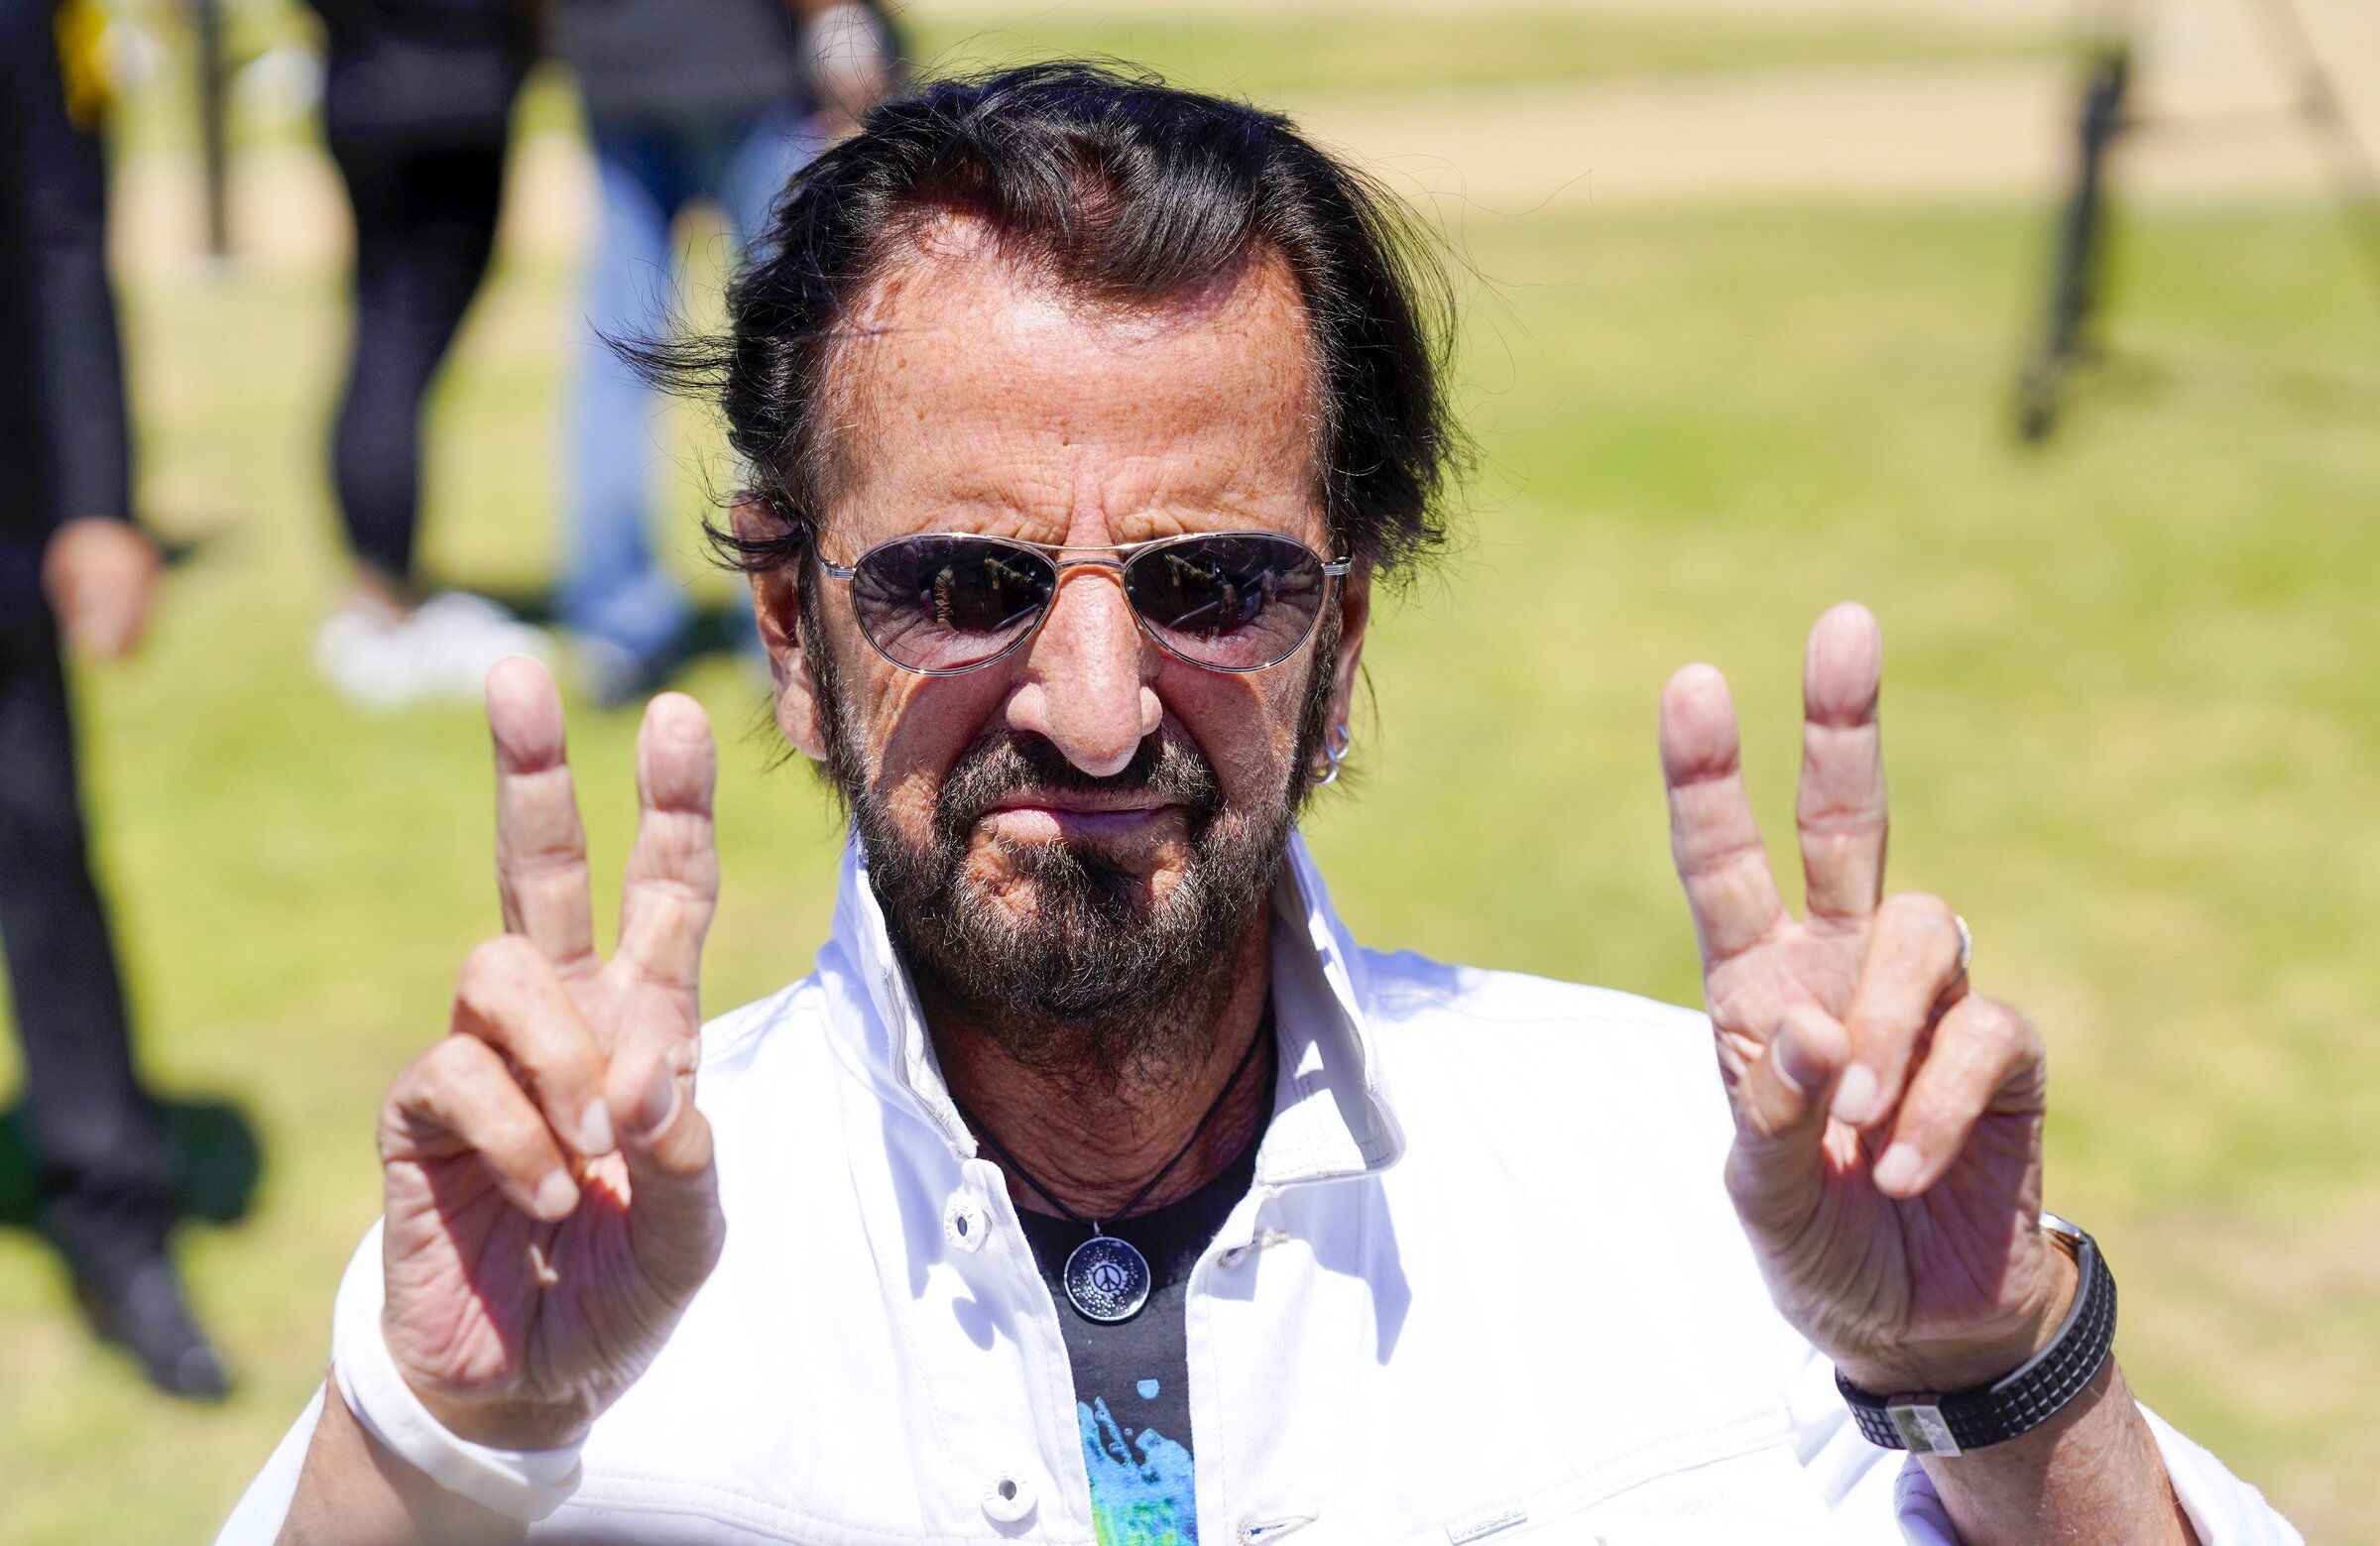 Is Ringo Starr the most underrated drummer ever? Seattle drummers